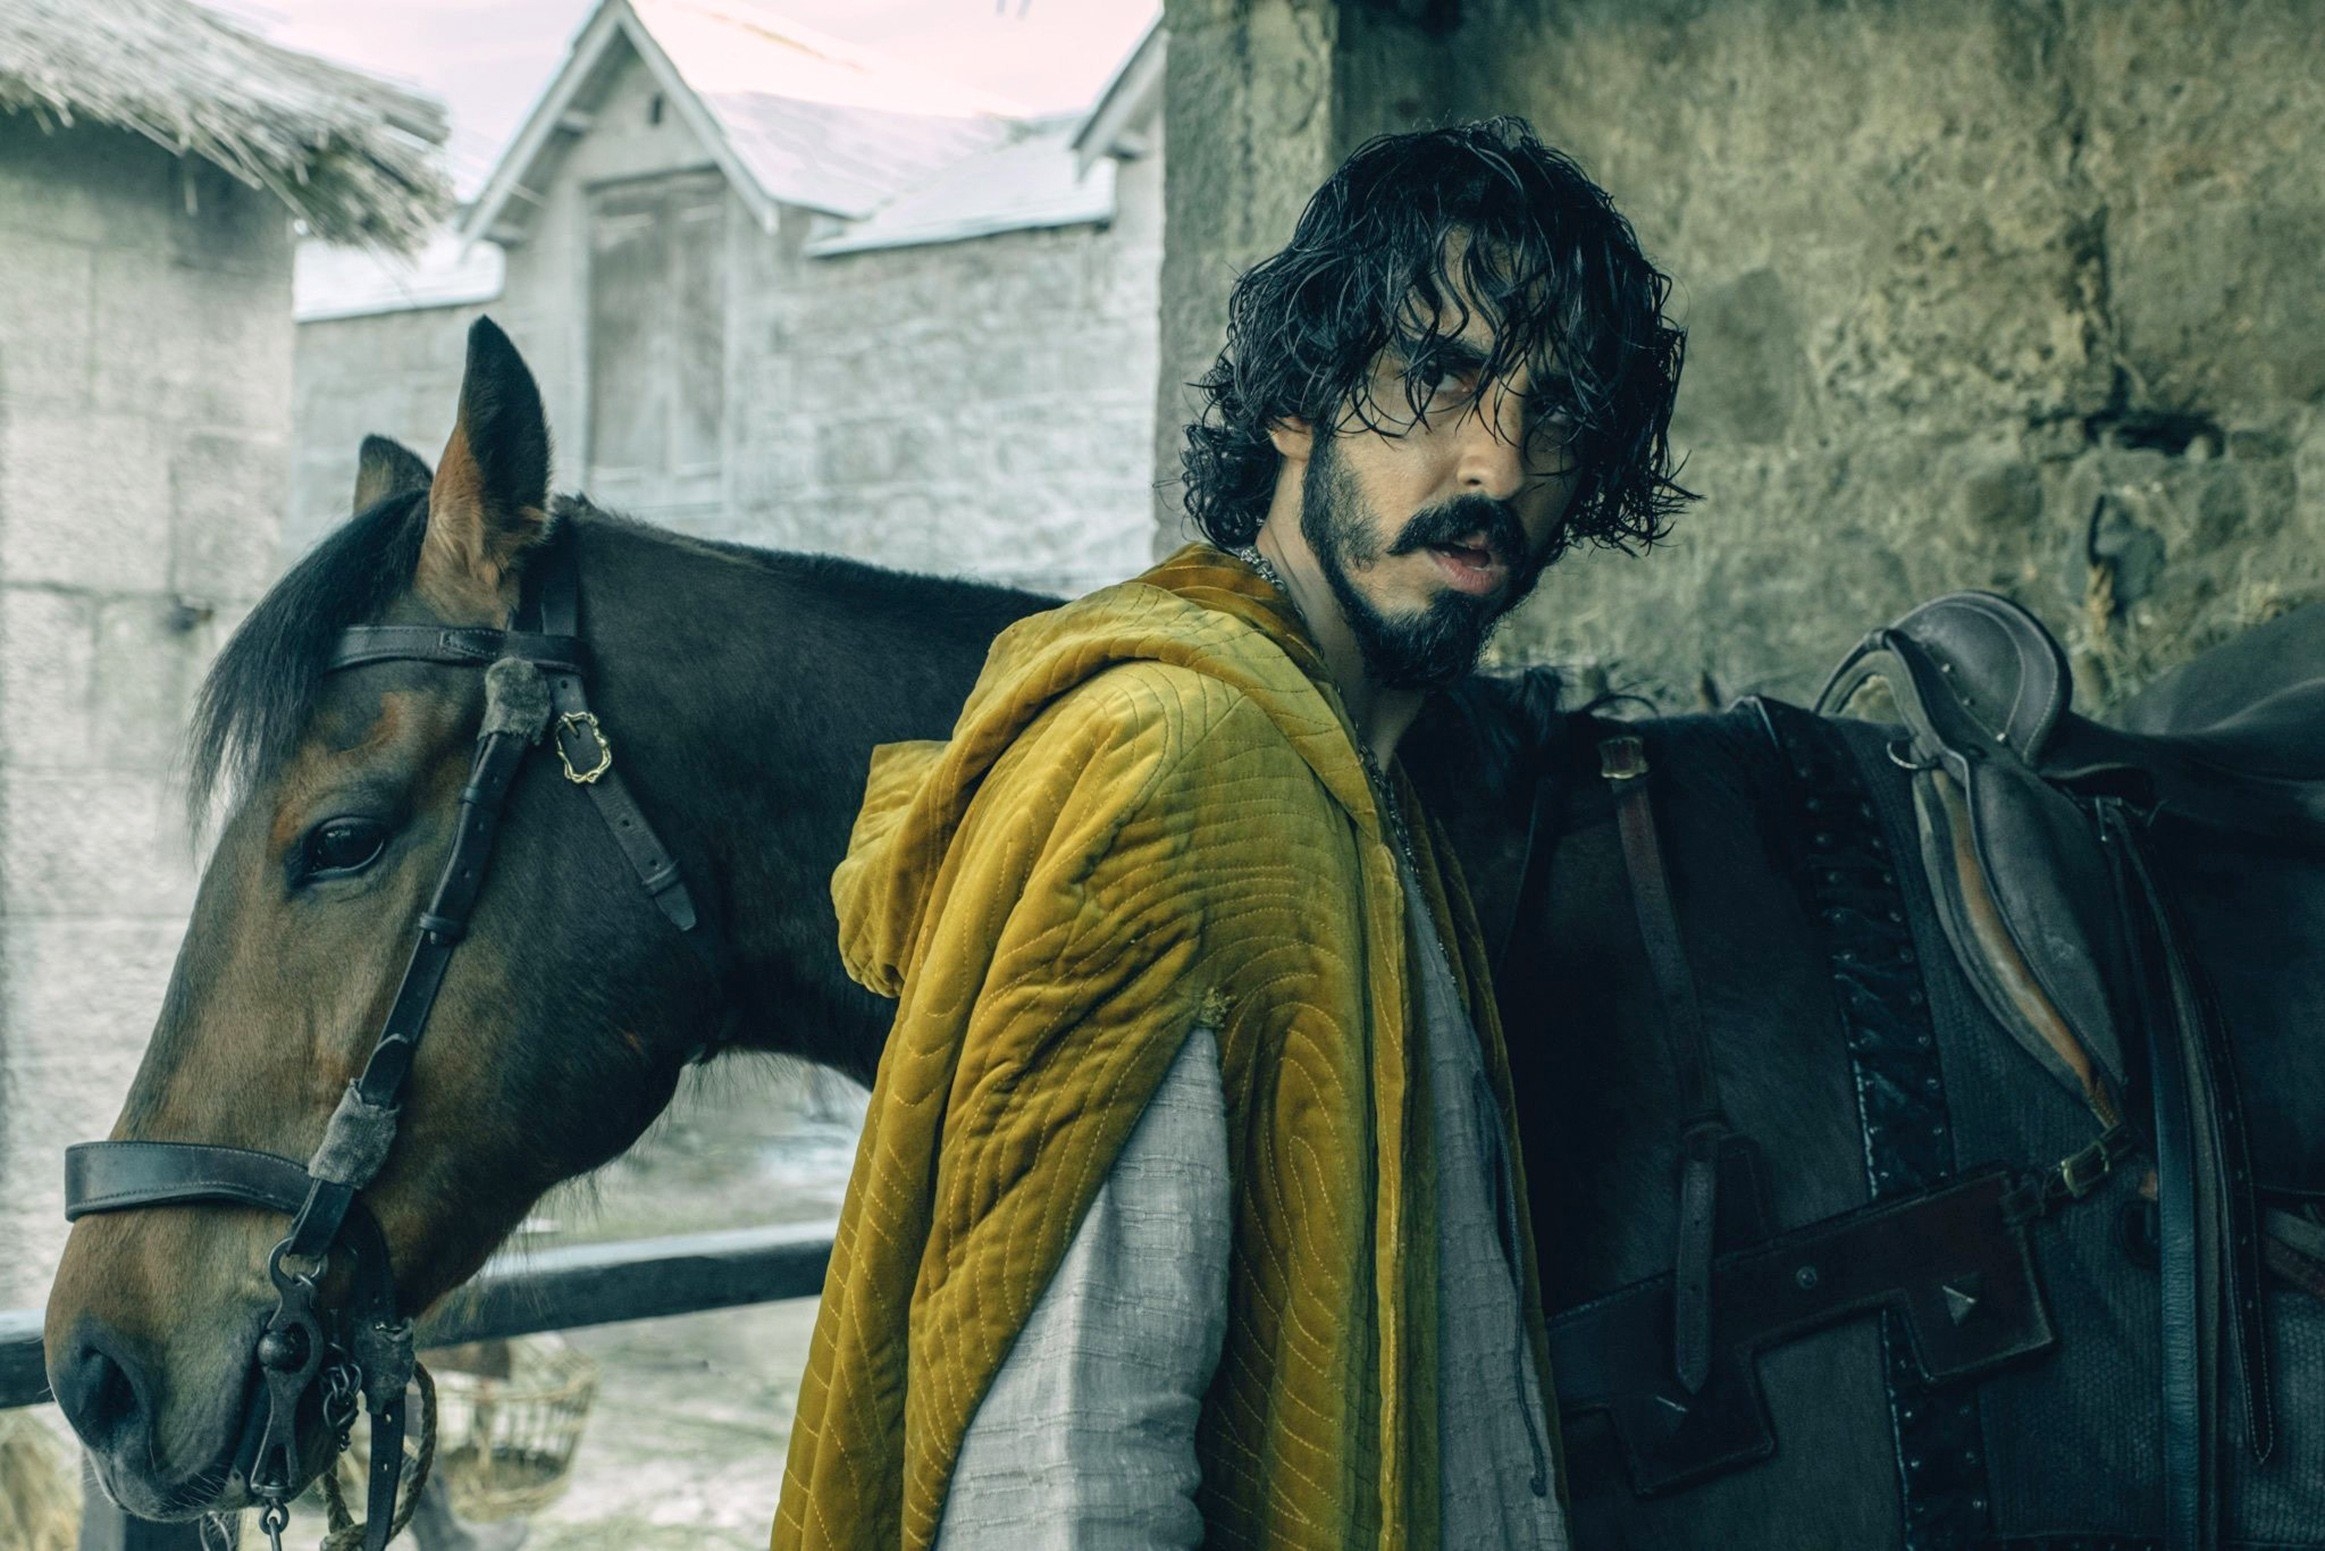 Dev Patel stands by a horse